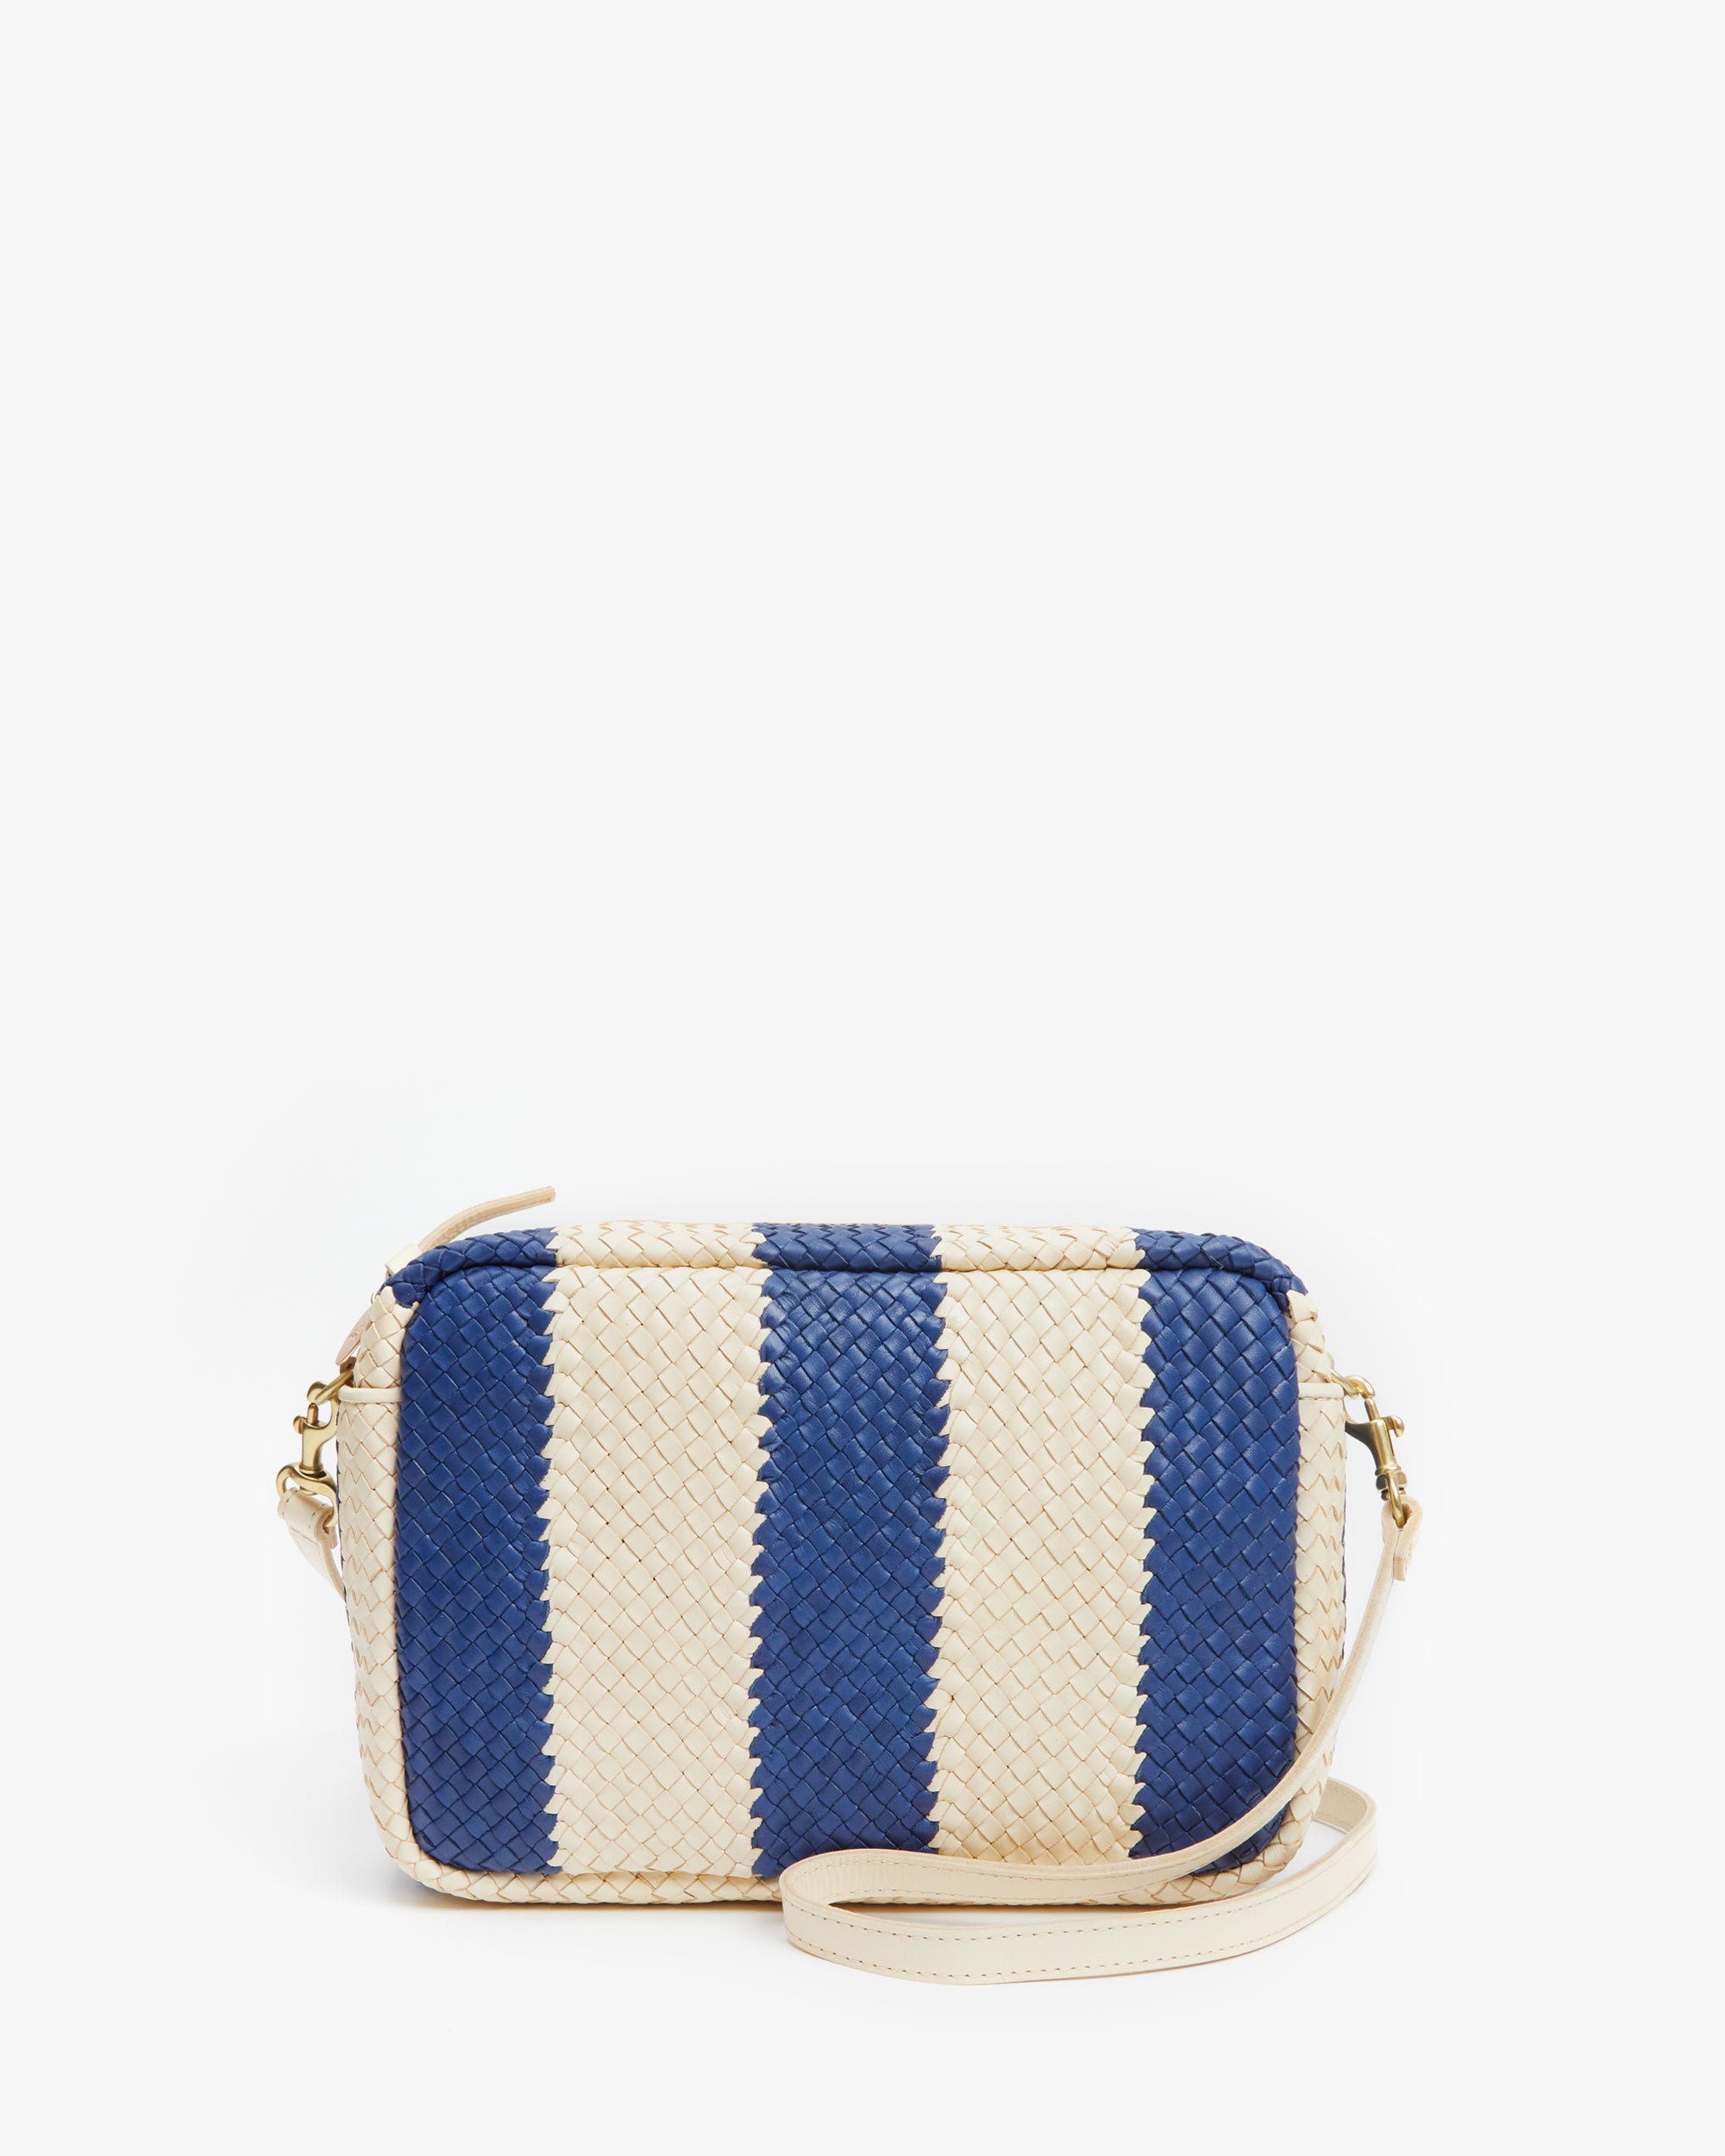 Clare V. Marisol Woven Racing Stripes